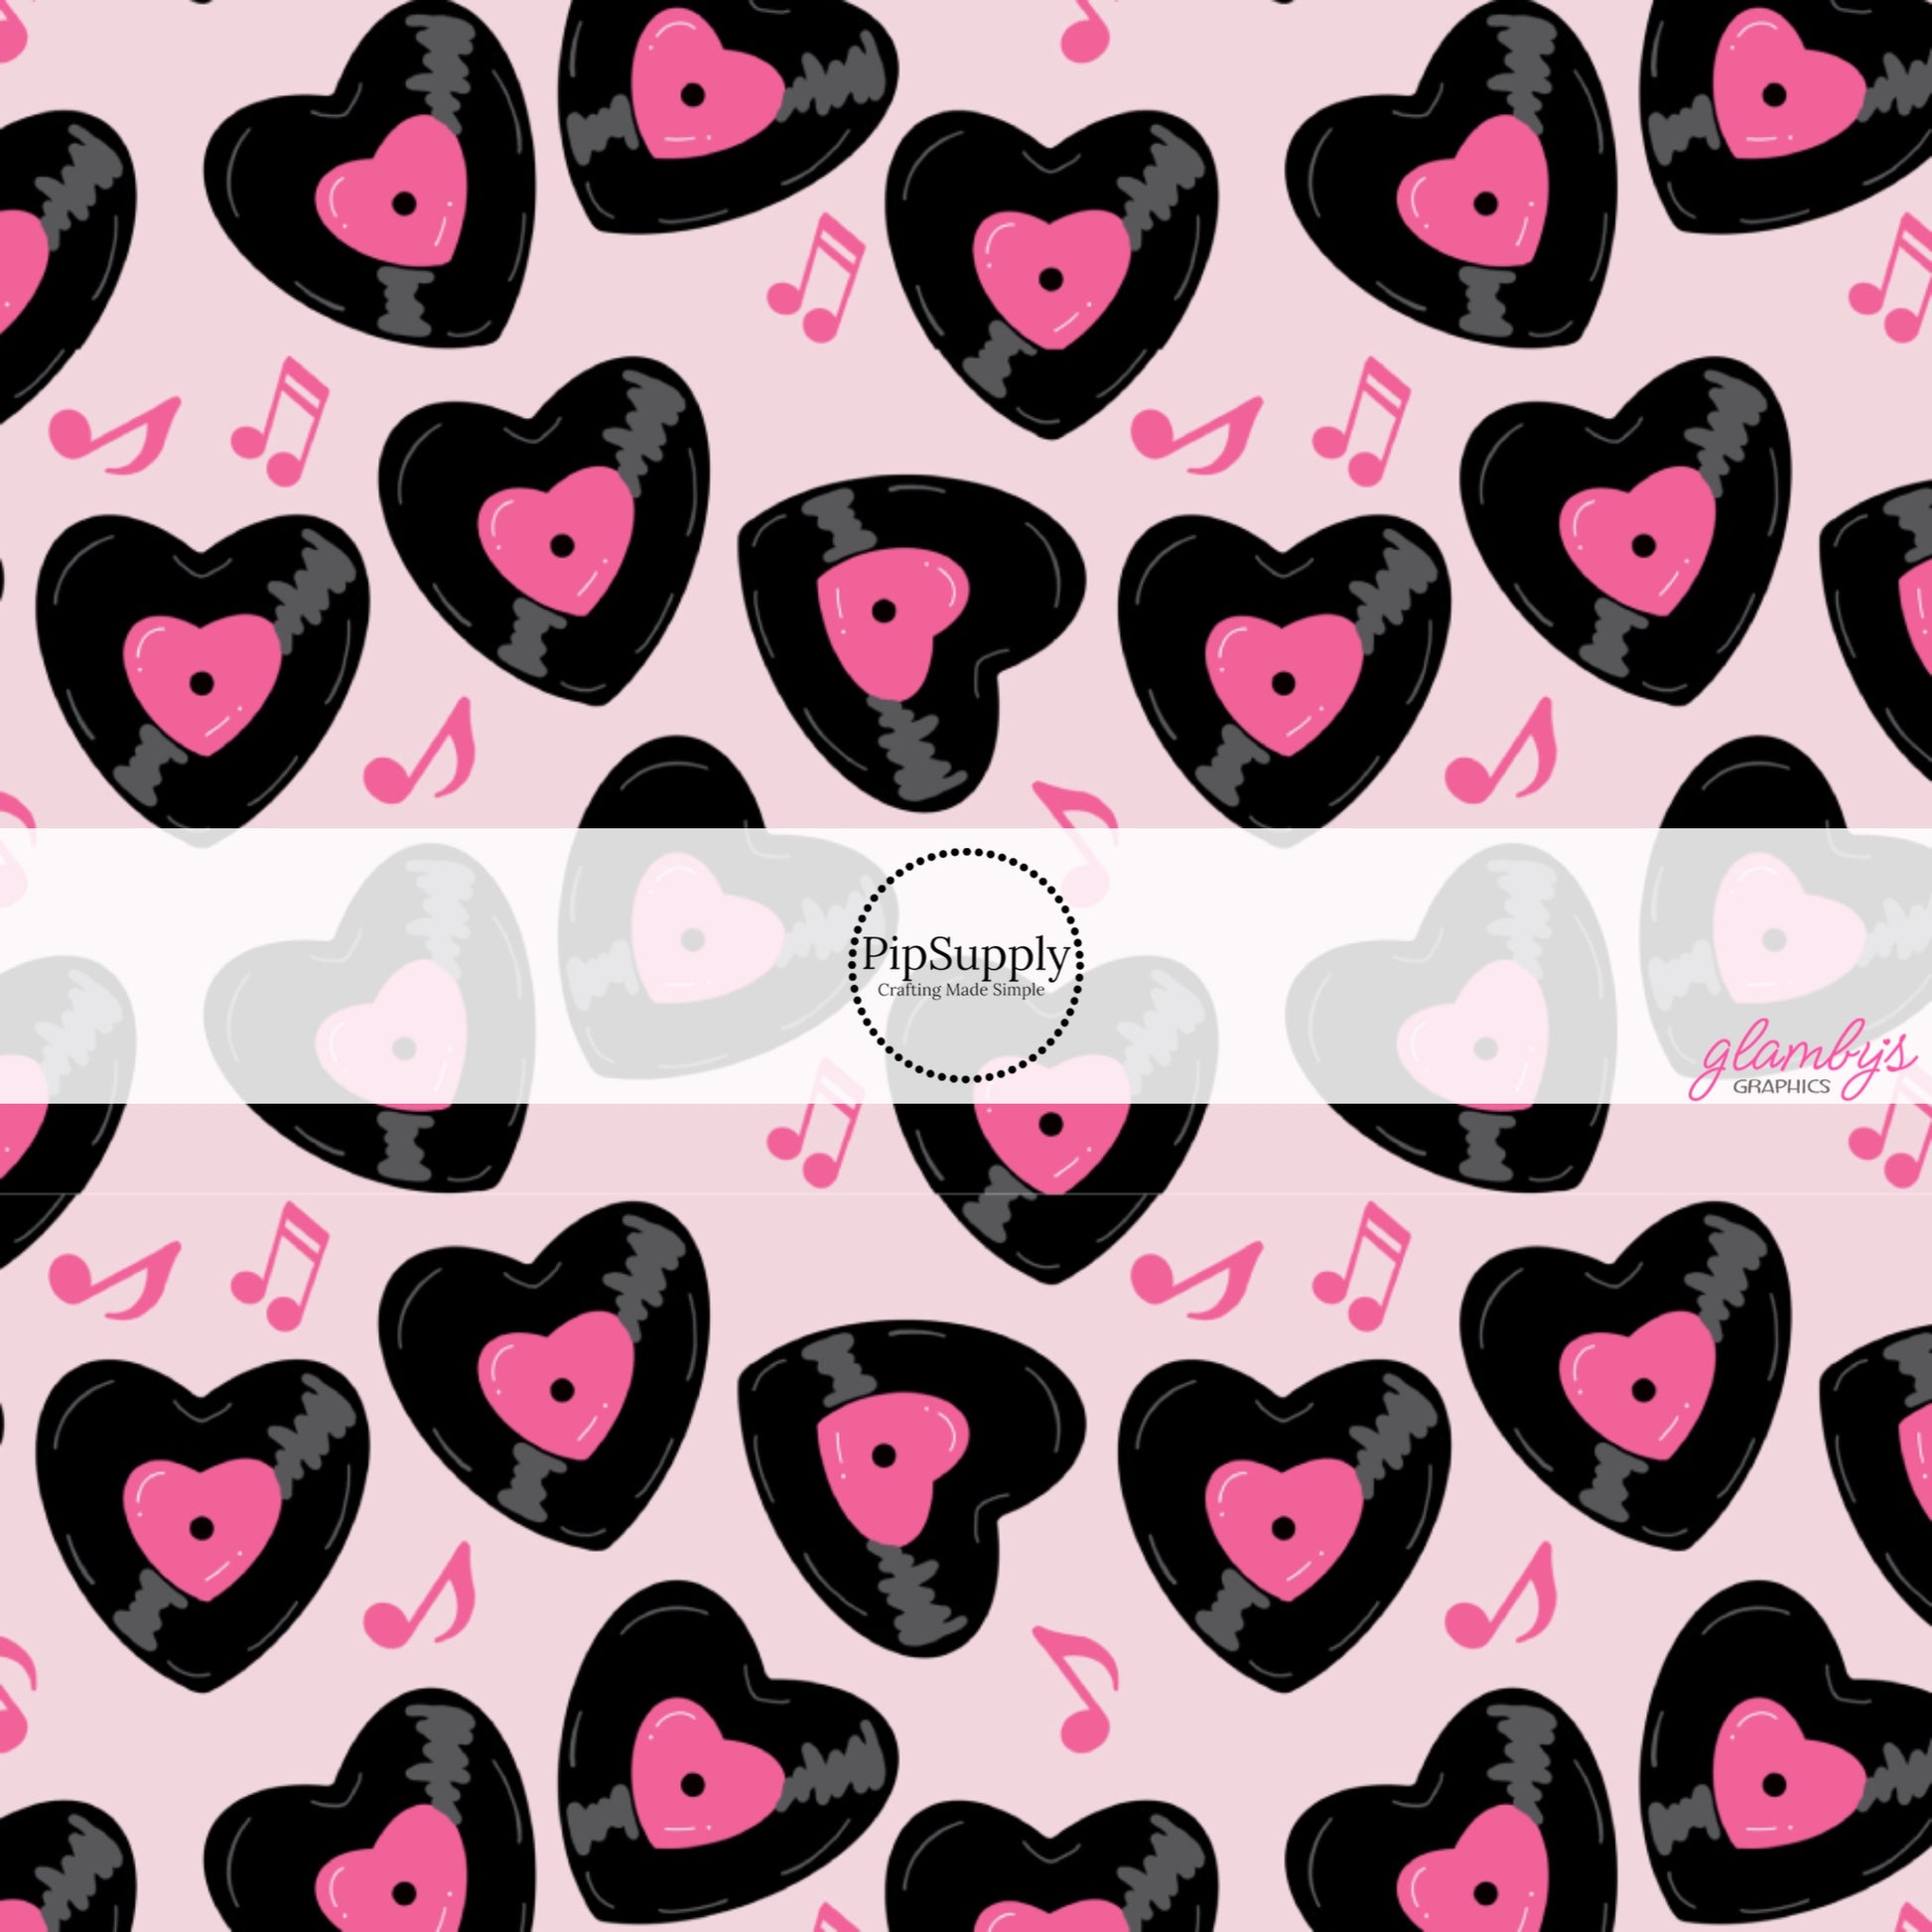 Pink music notes and heart vinyls on pink hair bow strips